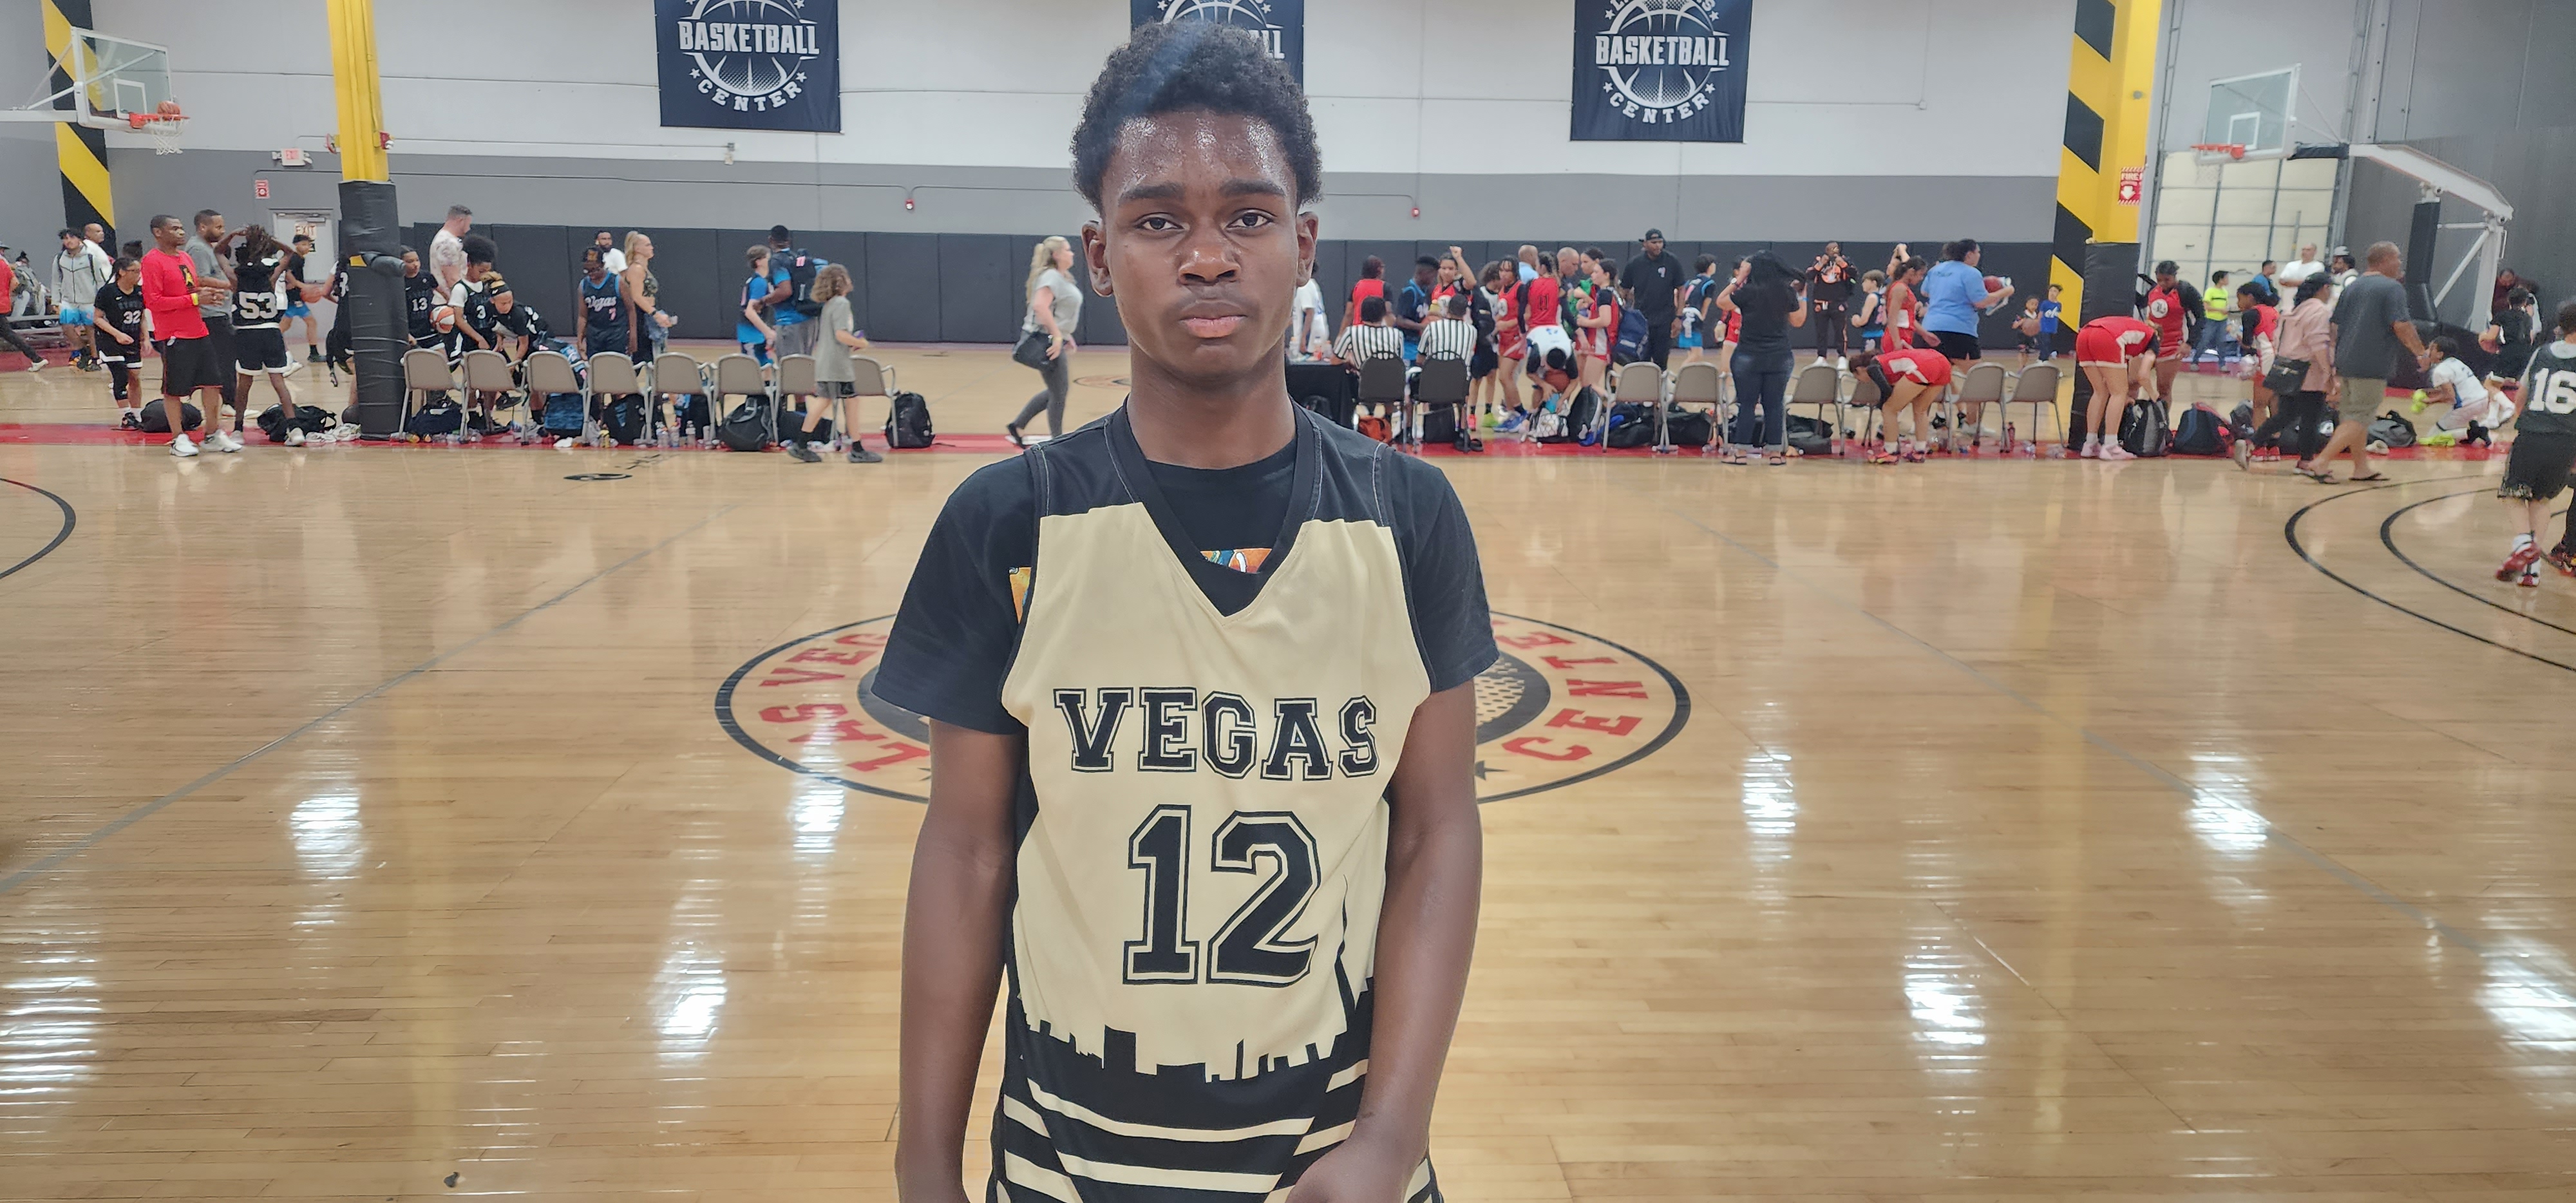 <span class="pn-tooltip pn-player-link">
        <span class="name-pointer">Las Vegas Middle School Combine Preview: 2028’s Too Watch</span>
        <span class="info-box not-prose" style="background: linear-gradient(to bottom, rgba(247,101,23, 0.95) 0%,rgba(247,101,23, 1) 100%)">
            <a href="https://prephoops.com/2023/10/las-vegas-middle-school-combine-preview-2028s-too-watch/" class="link-wrap">
                                    <span class="player-img"><img src="https://prephoops.com/wp-content/uploads/sites/2/2023/10/Aaron-McMorran.jpg?w=150&h=150&crop=1" alt="Las Vegas Middle School Combine Preview: 2028’s Too Watch"></span>
                
                <span class="player-details">
                    <span class="first-name">Las</span>
                    <span class="last-name">Vegas Middle School Combine Preview: 2028’s Too Watch</span>
                    <span class="measurables">
                                            </span>
                                    </span>
                <span class="player-rank">
                                                        </span>
                                    <span class="state-abbr"></span>
                            </a>

            
        </span>
    </span>
 